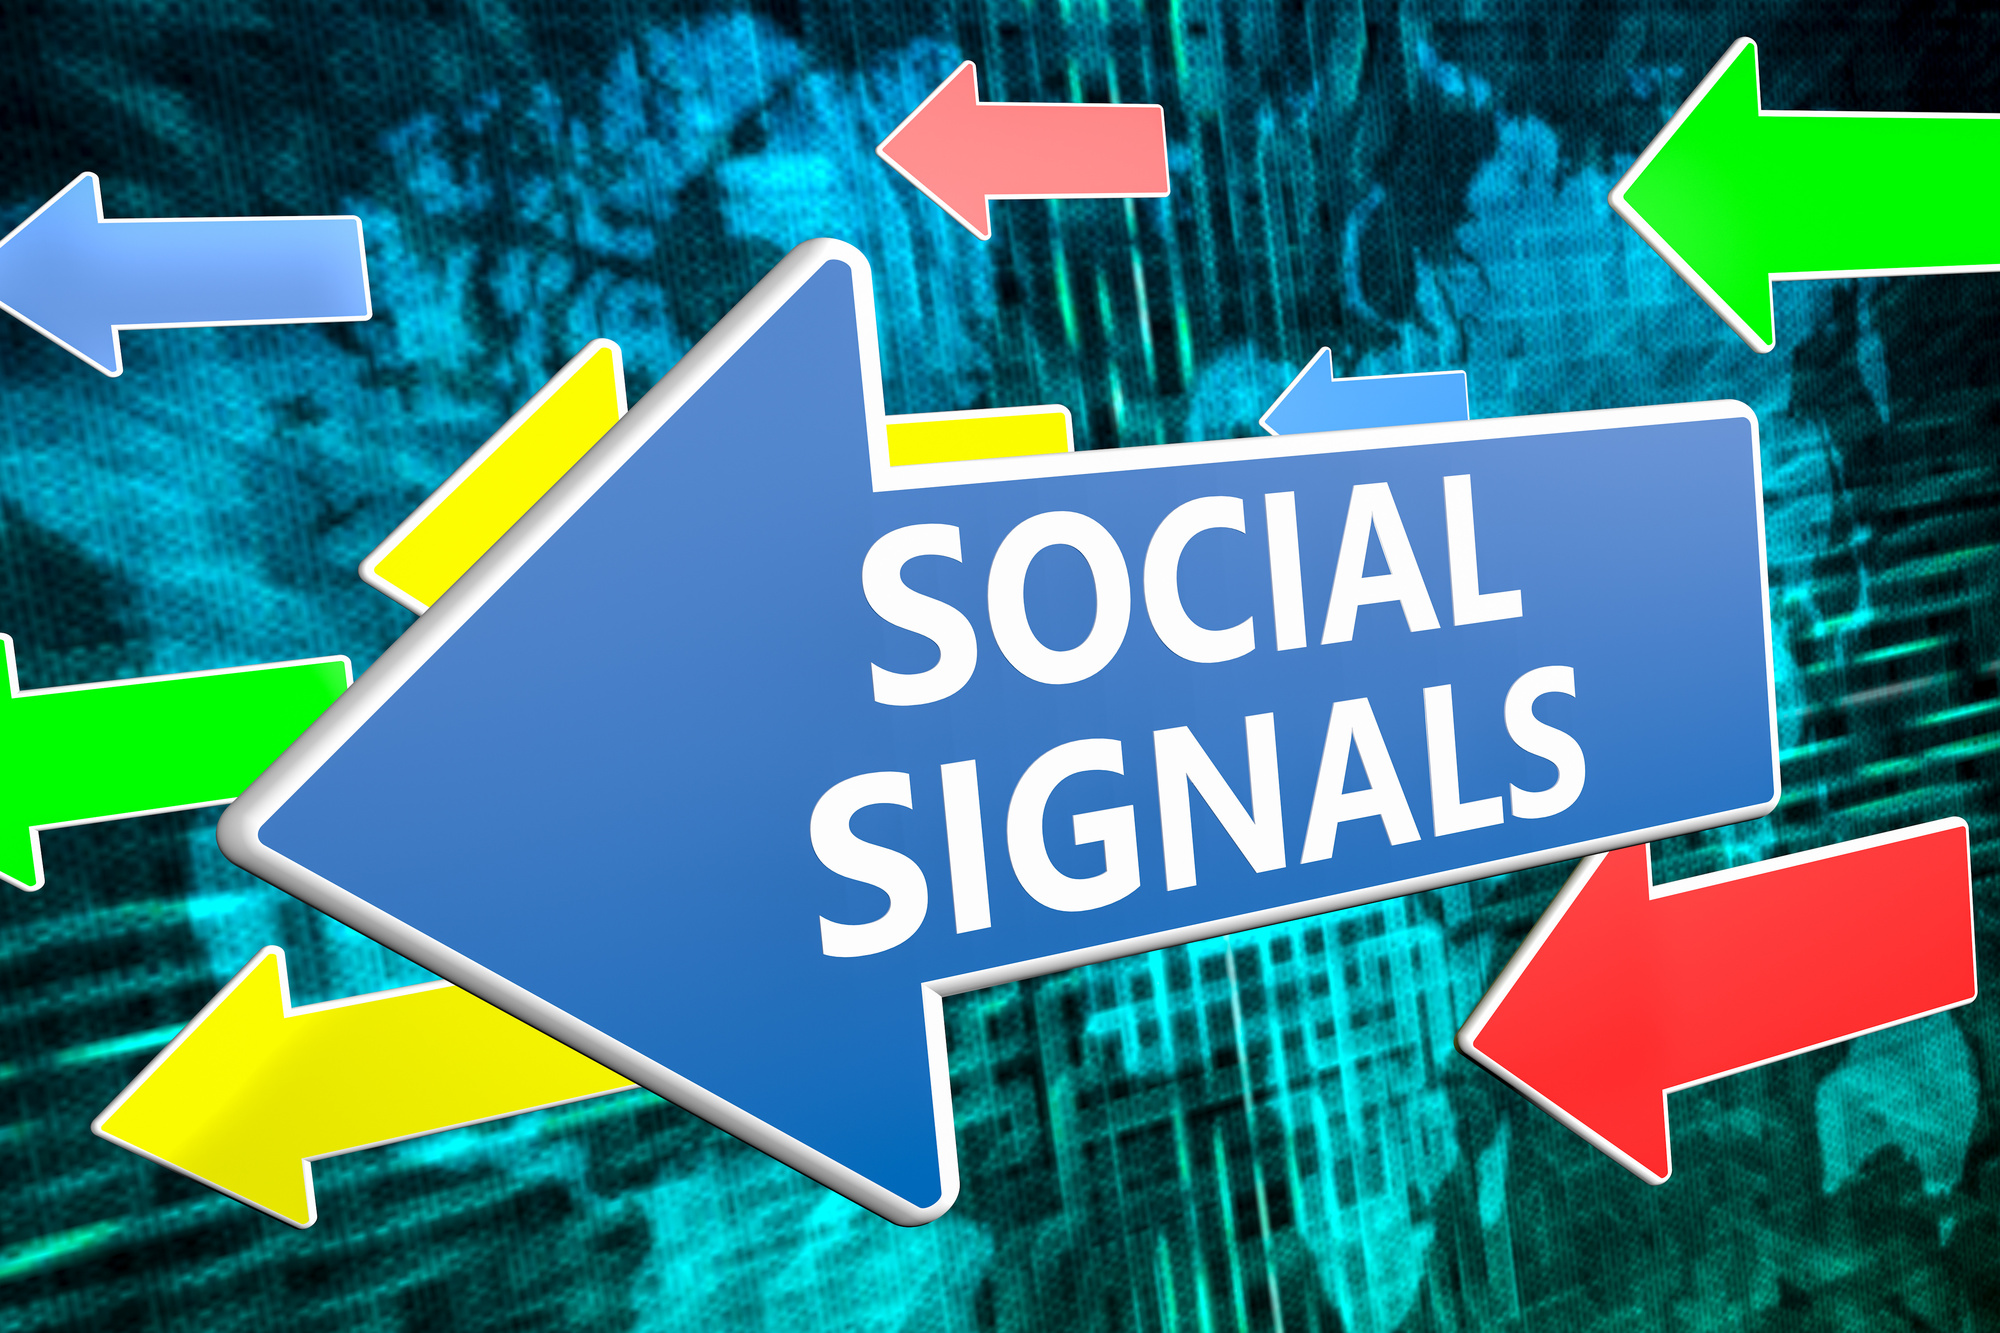 Learning from Social Signals